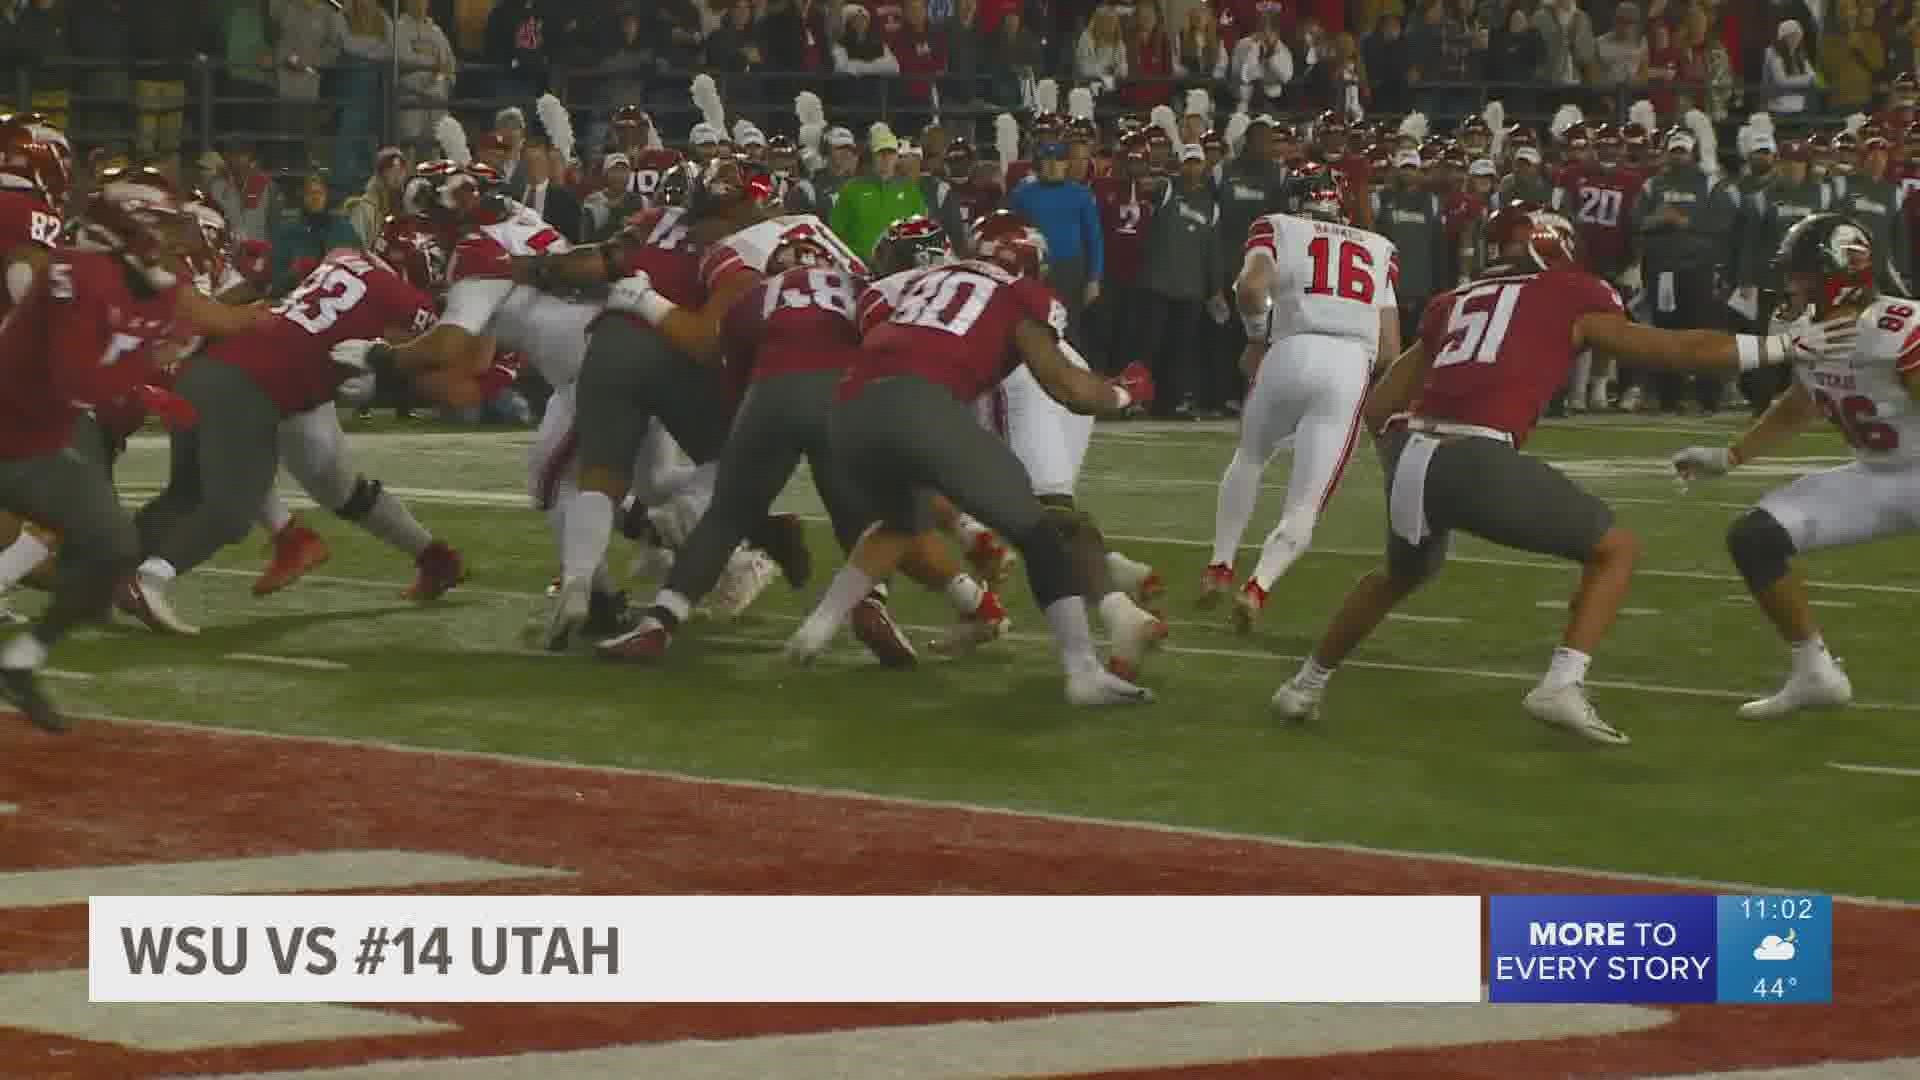 Backup quarterback Bryson Barnes threw for 175 yards and a touchdown and No. 14 Utah beat Washington State 21-17.